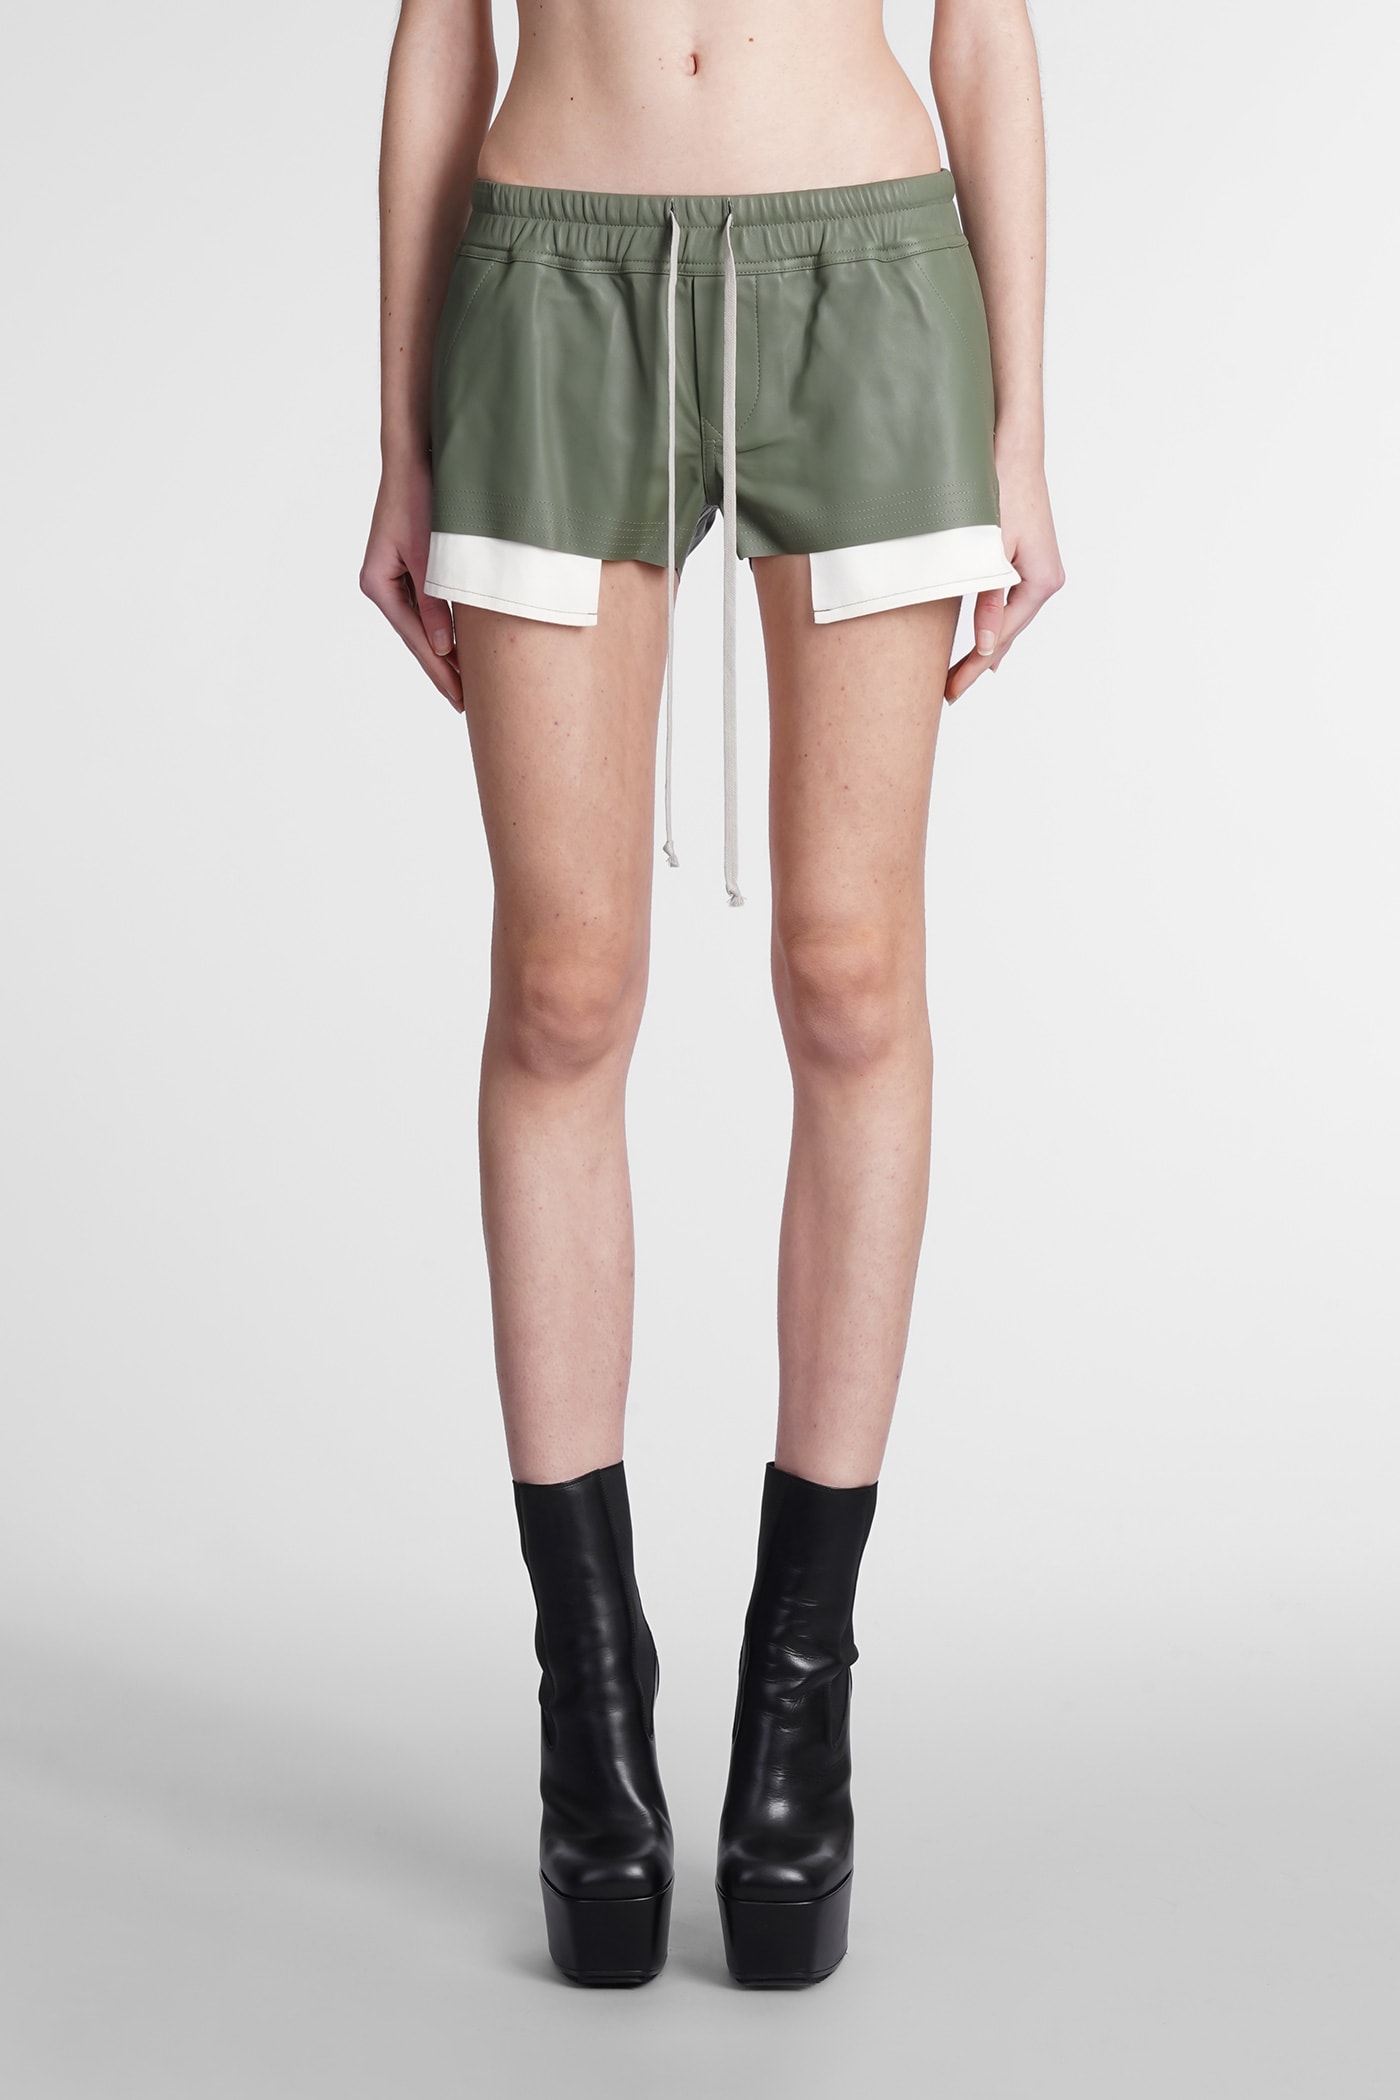 RICK OWENS BOXERS SHORTS IN GREEN LEATHER